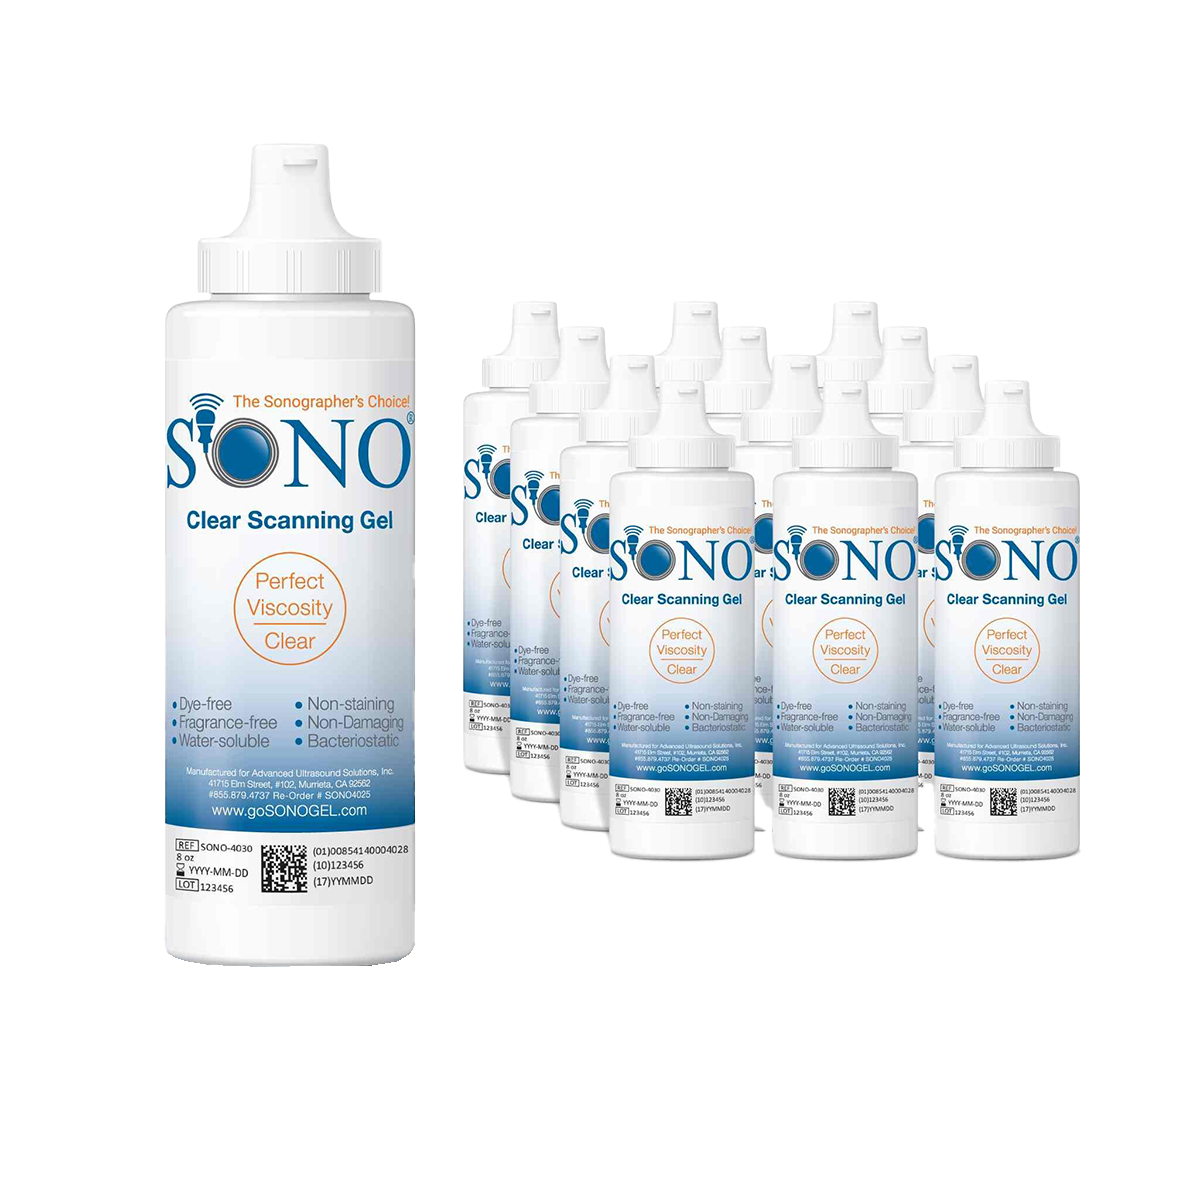 SONO Ultrasound Gel 12 Pack - High-Quality Scanning Gel for Clear Imaging